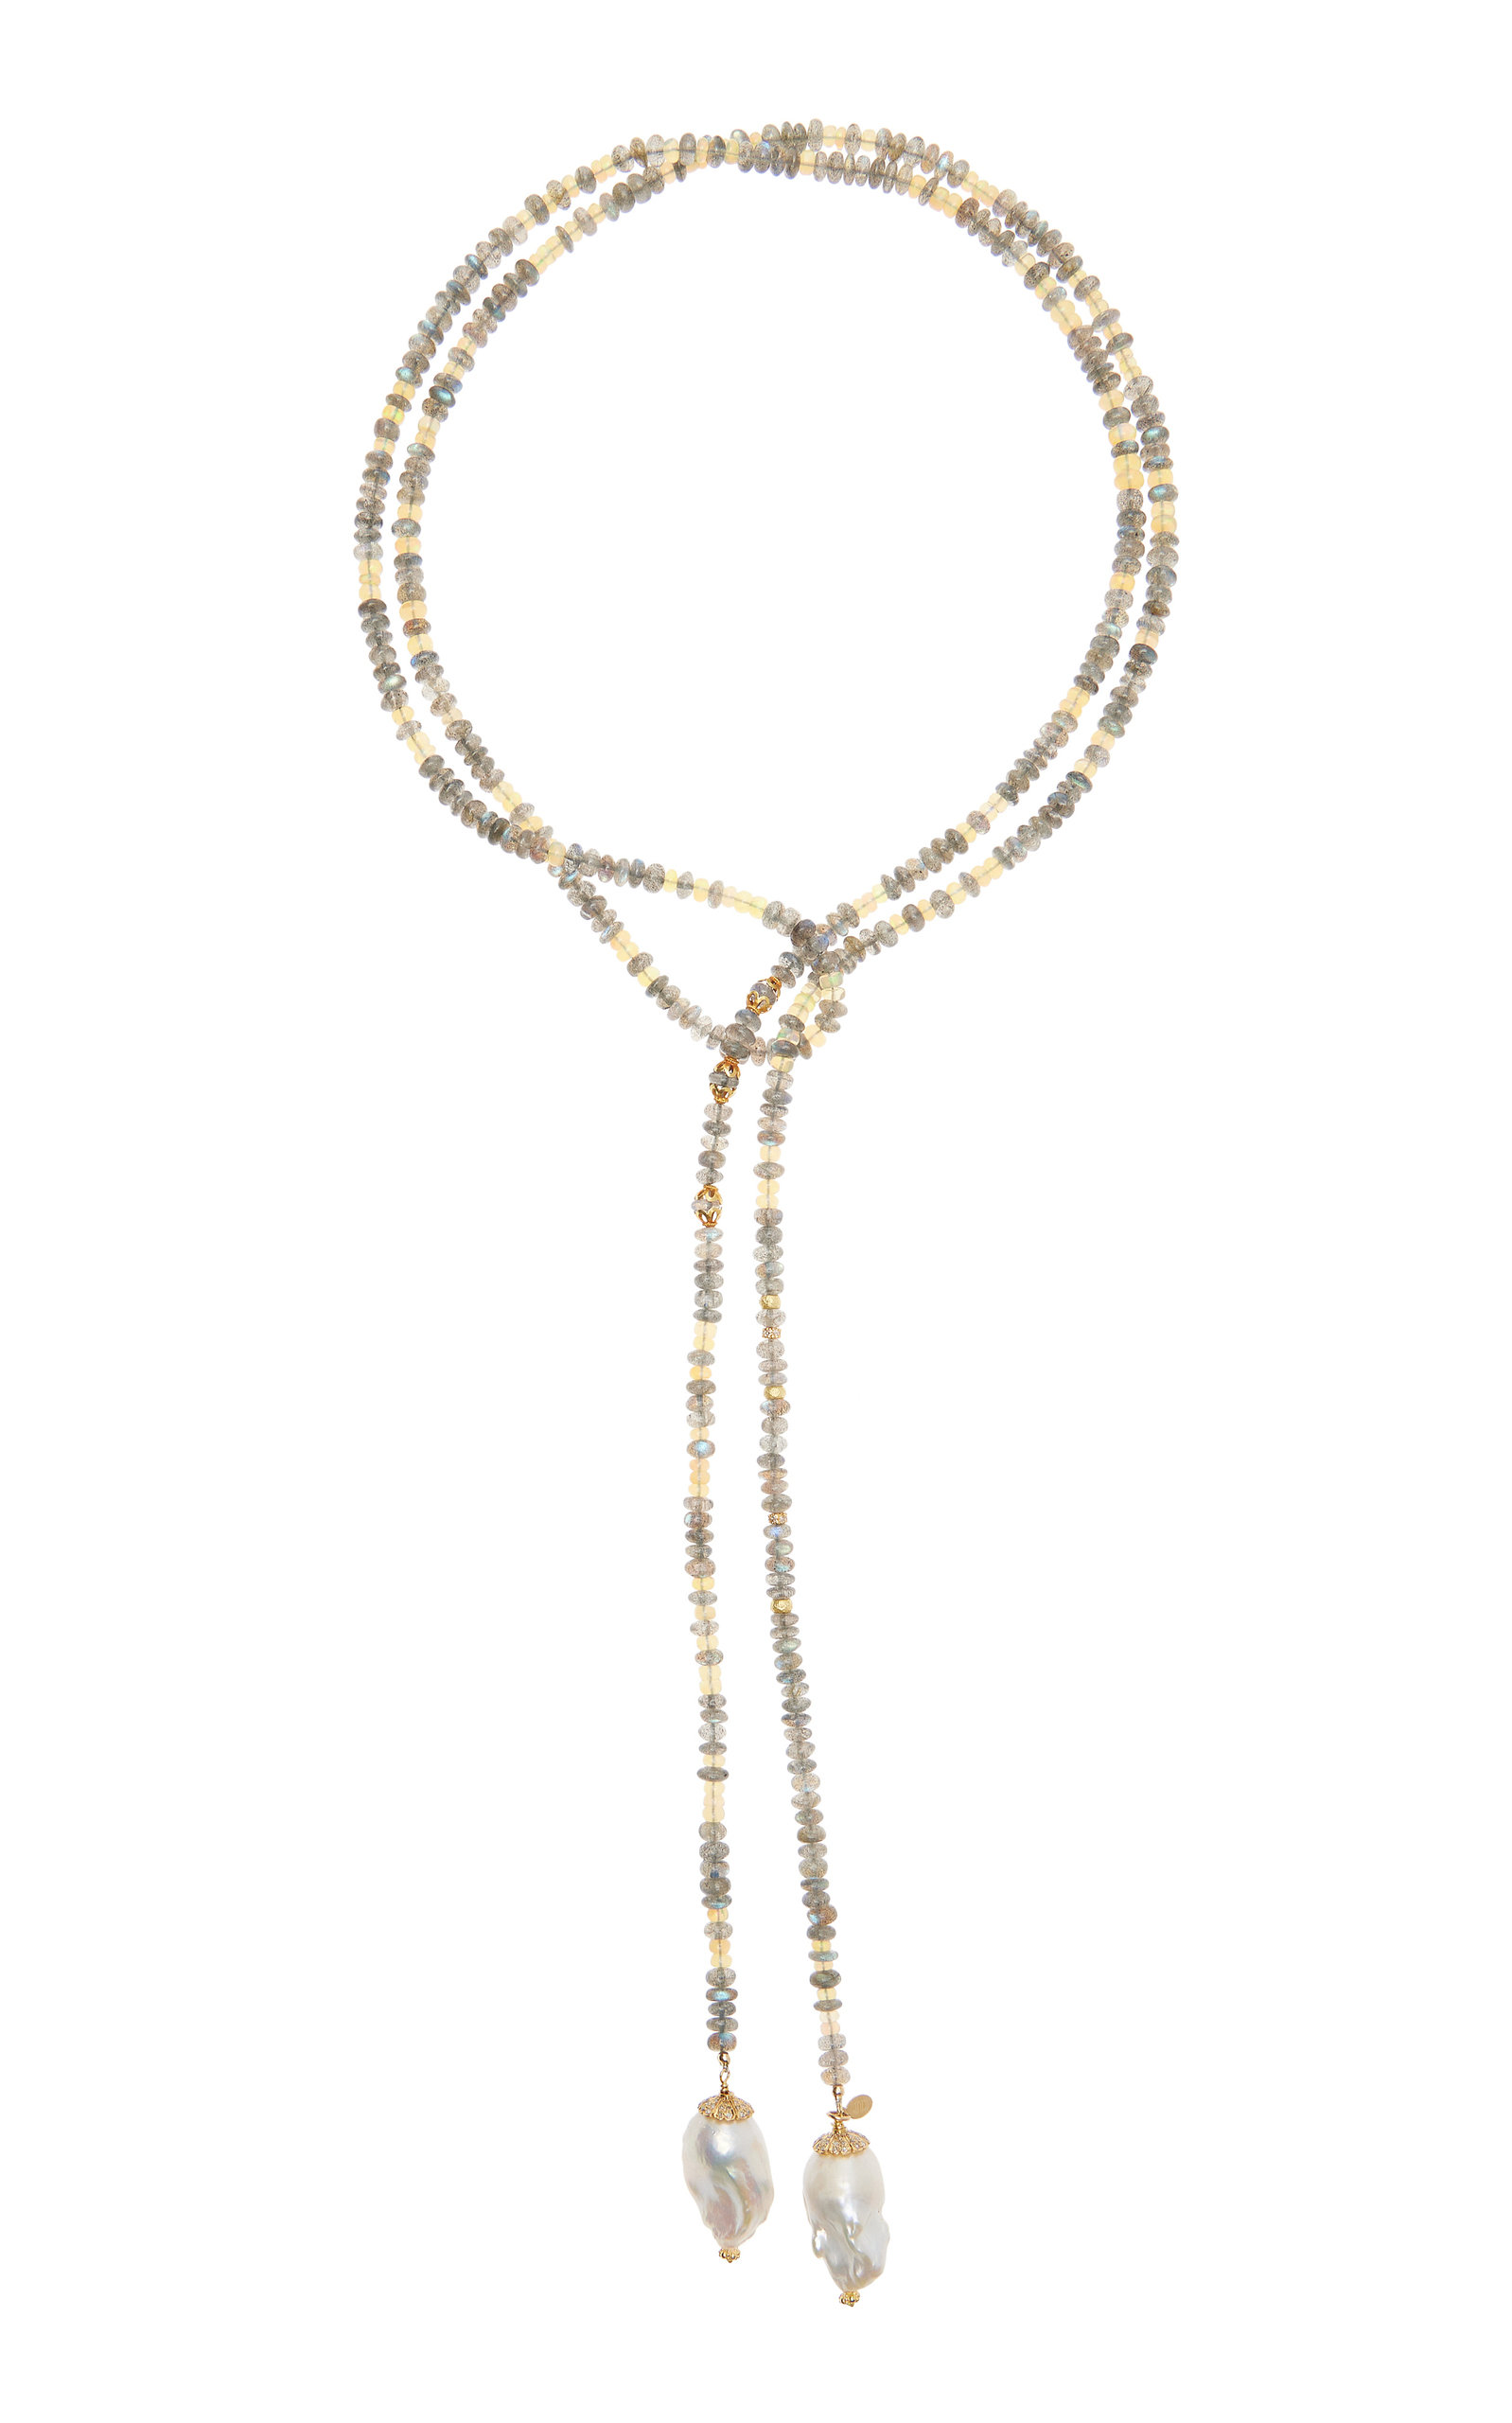 Joie DiGiovanni Women's Smooth Sunset 18K Gold Baroque Pearl Lariat Necklace